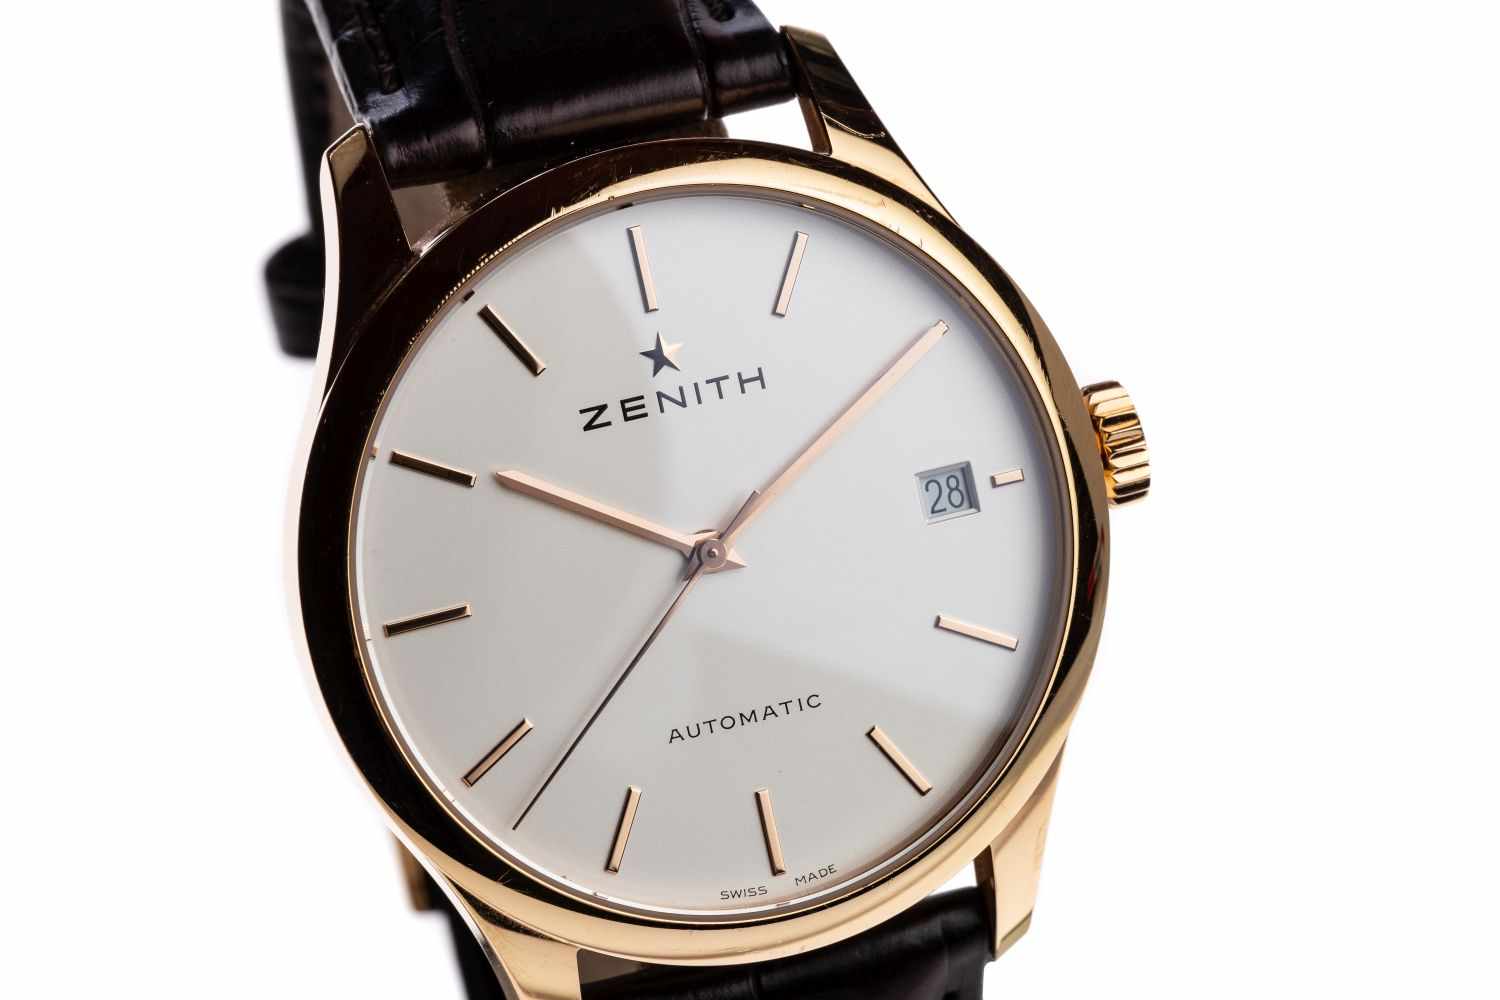 Zenith Port RoyalPreowned Classic Zenith Heritage Port Royal watch, diameter 38mm, box incl. - Image 2 of 2